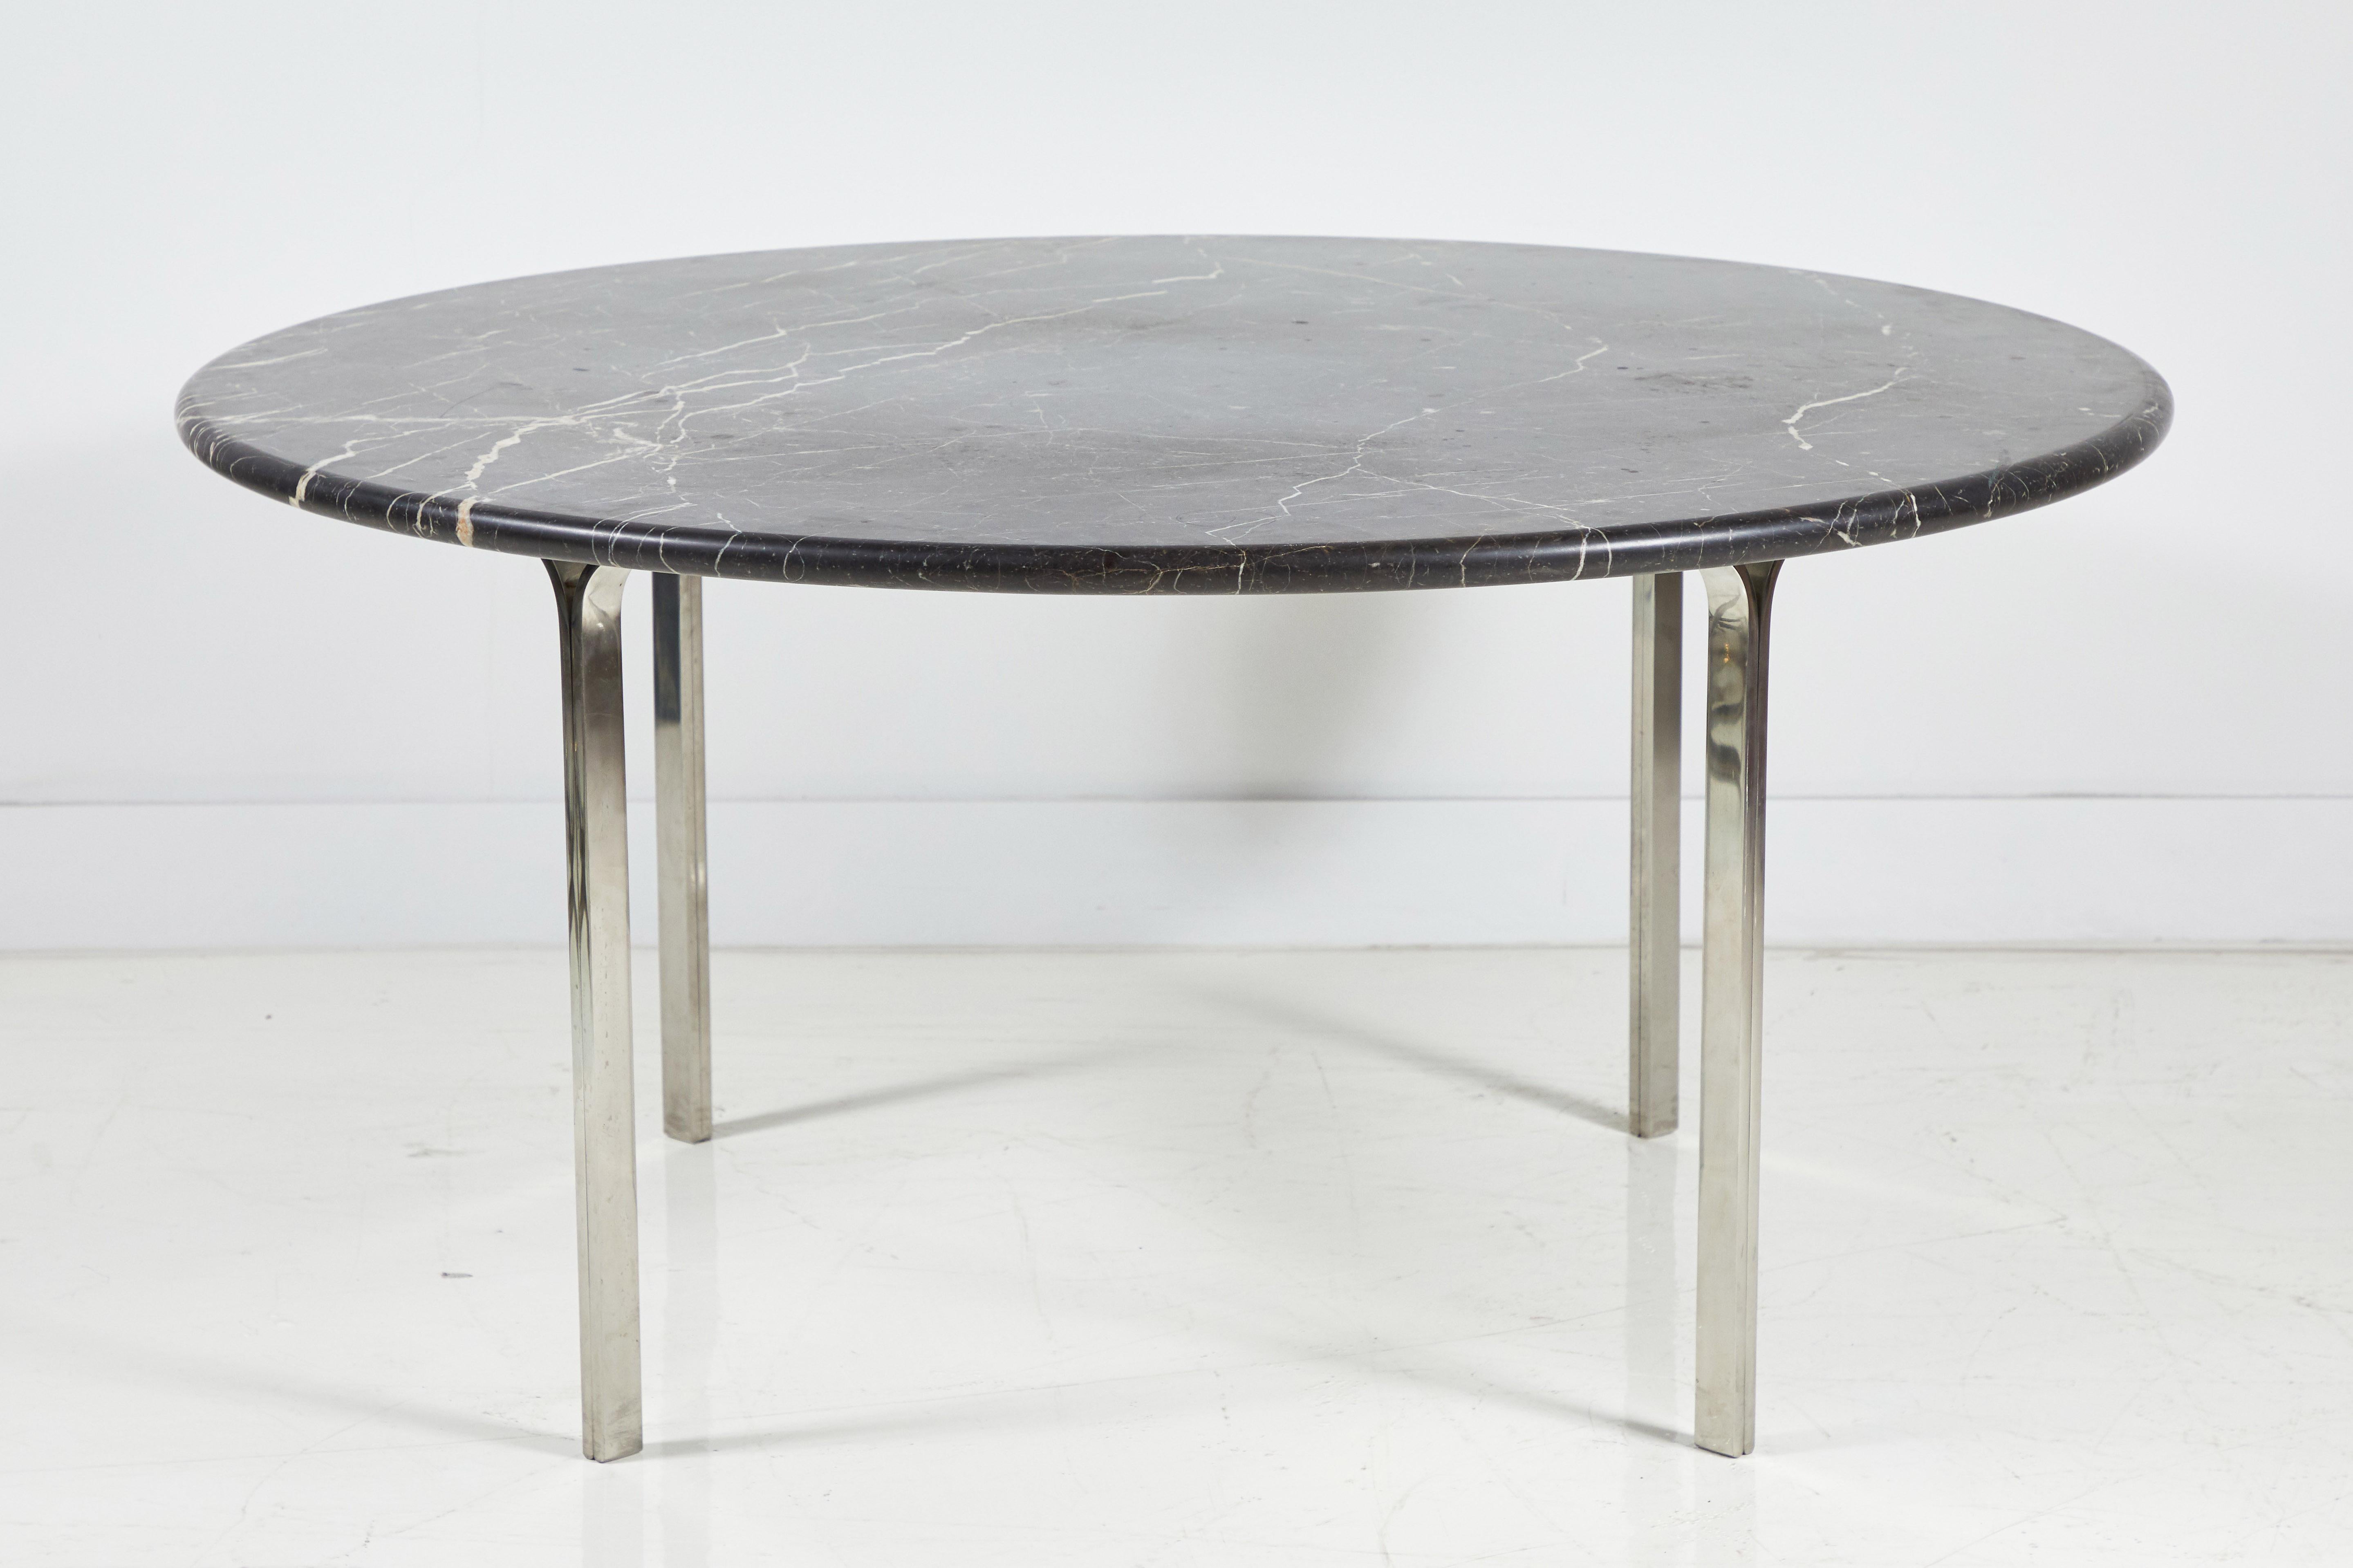 Round chrome dining table with heavy black marble top.